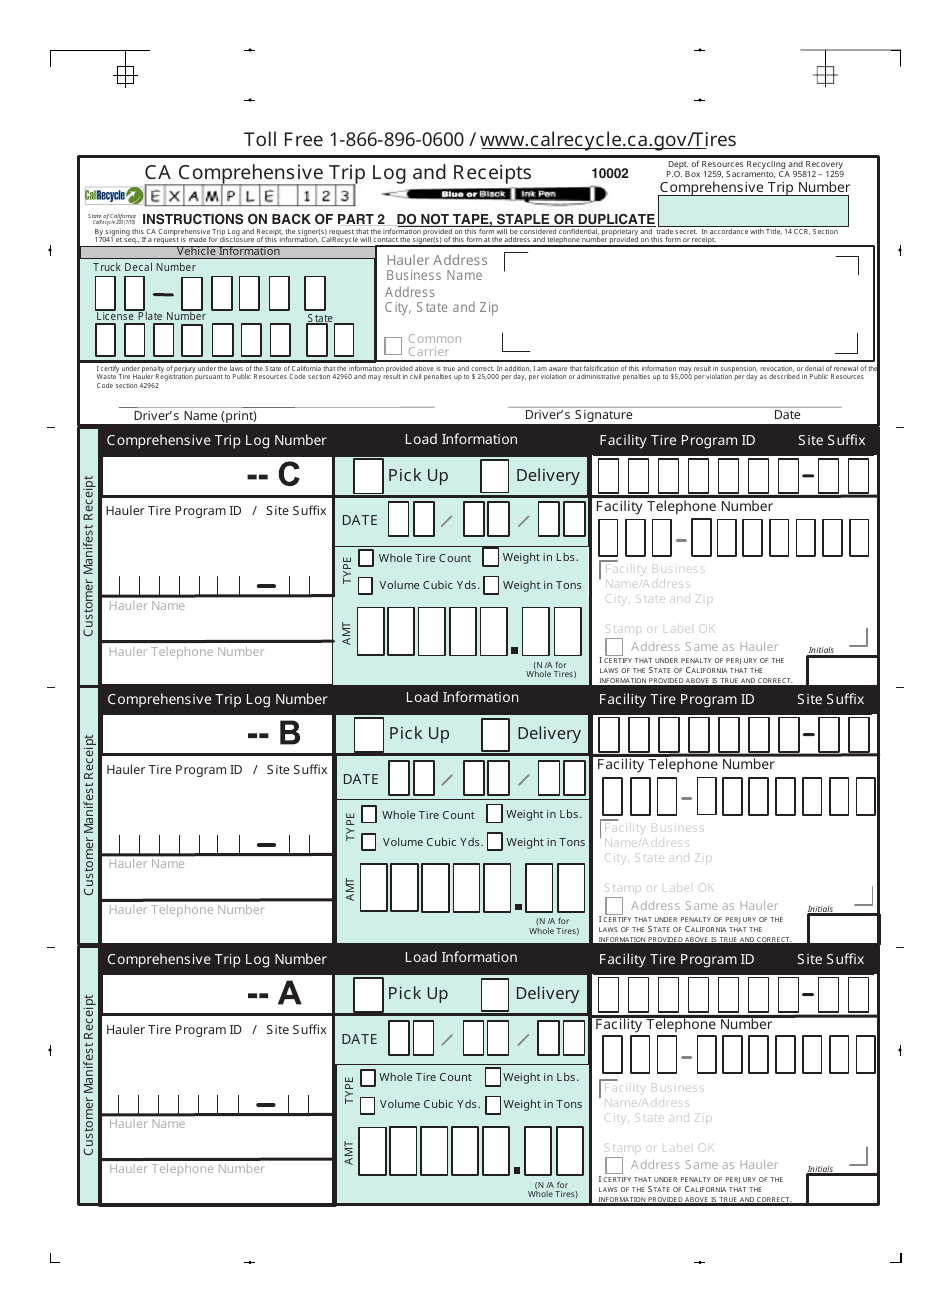 Form CalRecycle203 Ca Comprehensive Trip Log and Receipts - Sample - California, Page 1